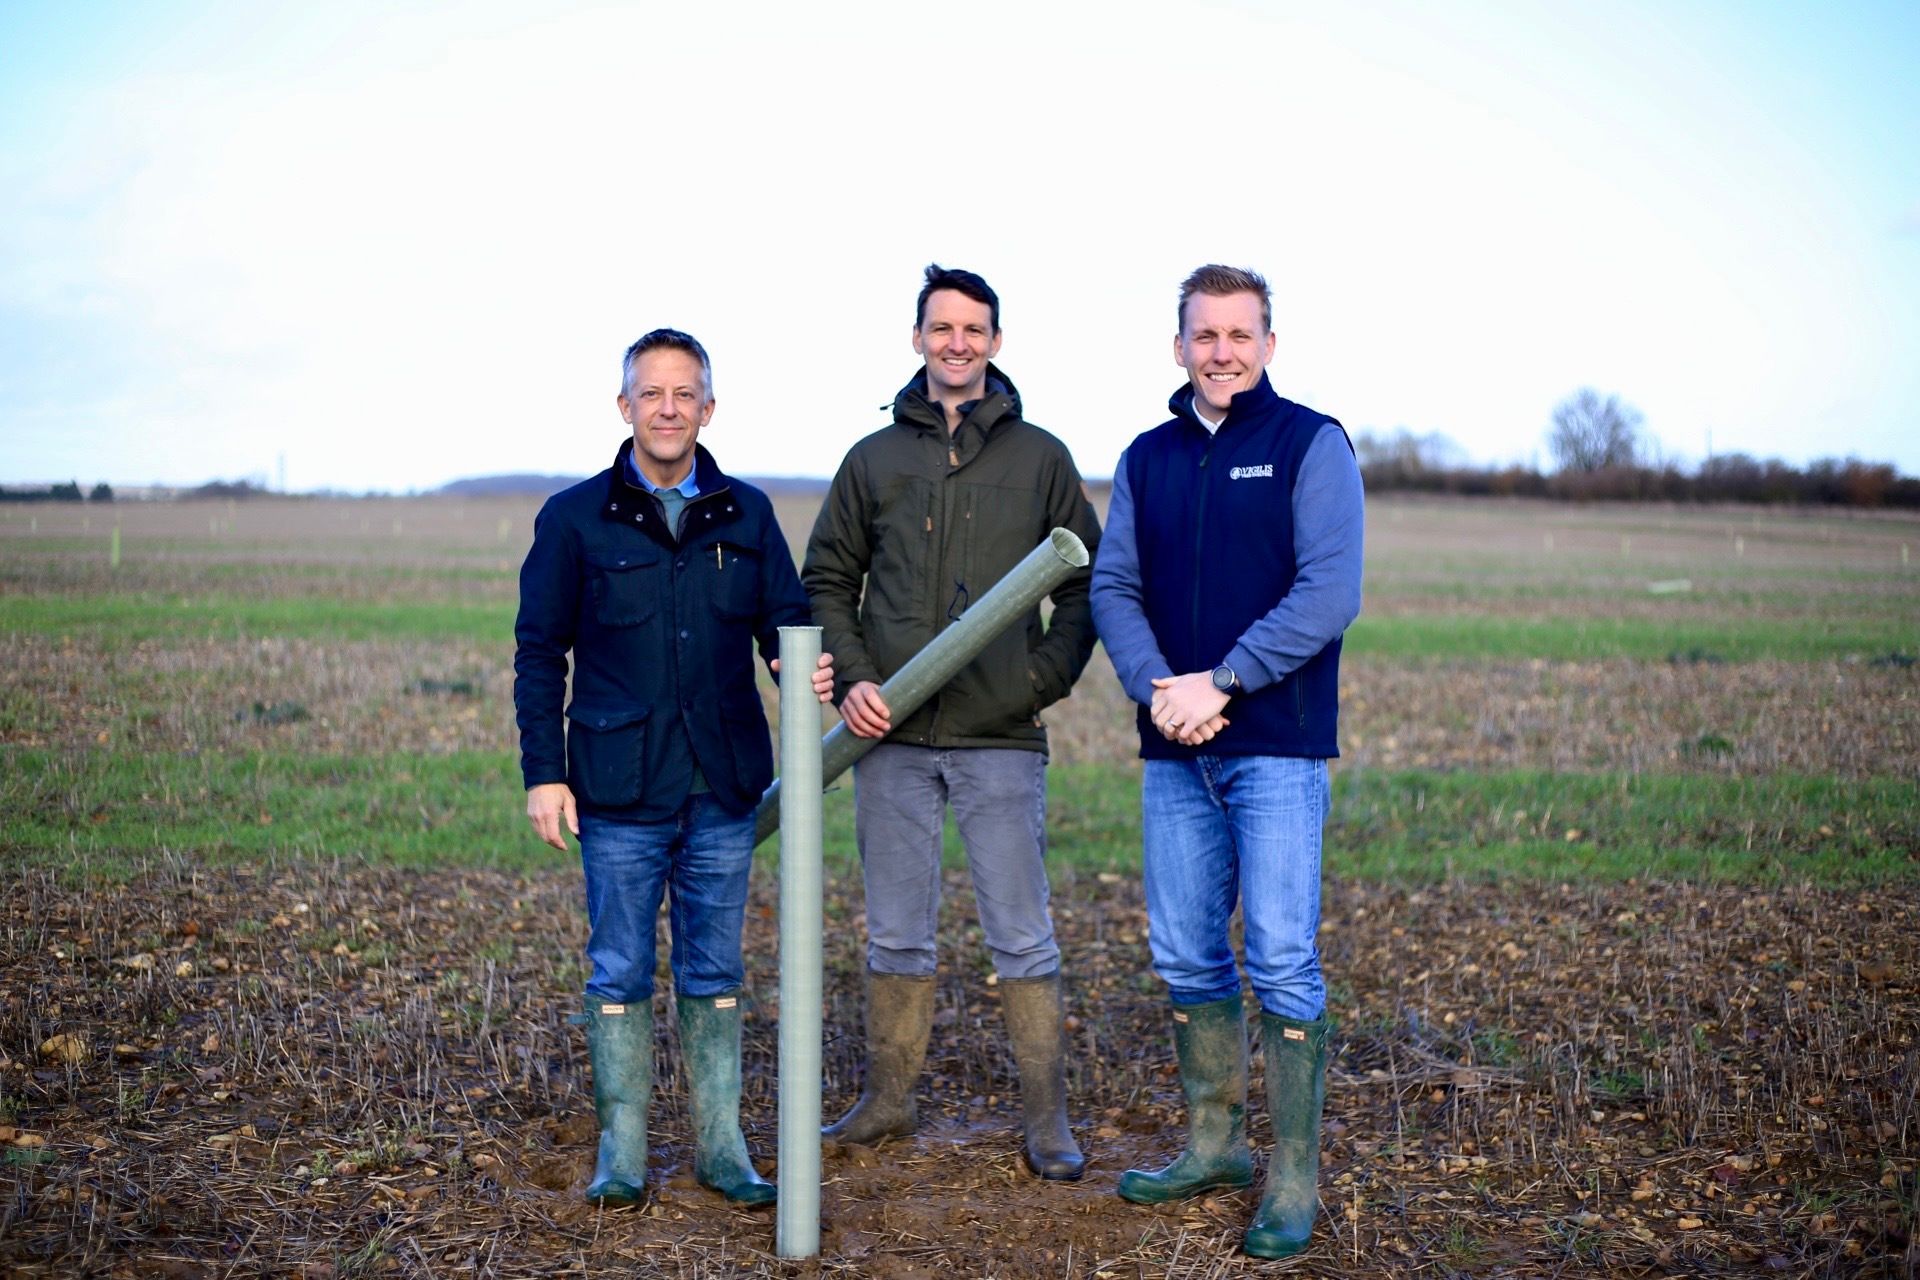 Representatives from Spains Hall estate and Vigilis Tree shelters stand in a field with newly planted trees